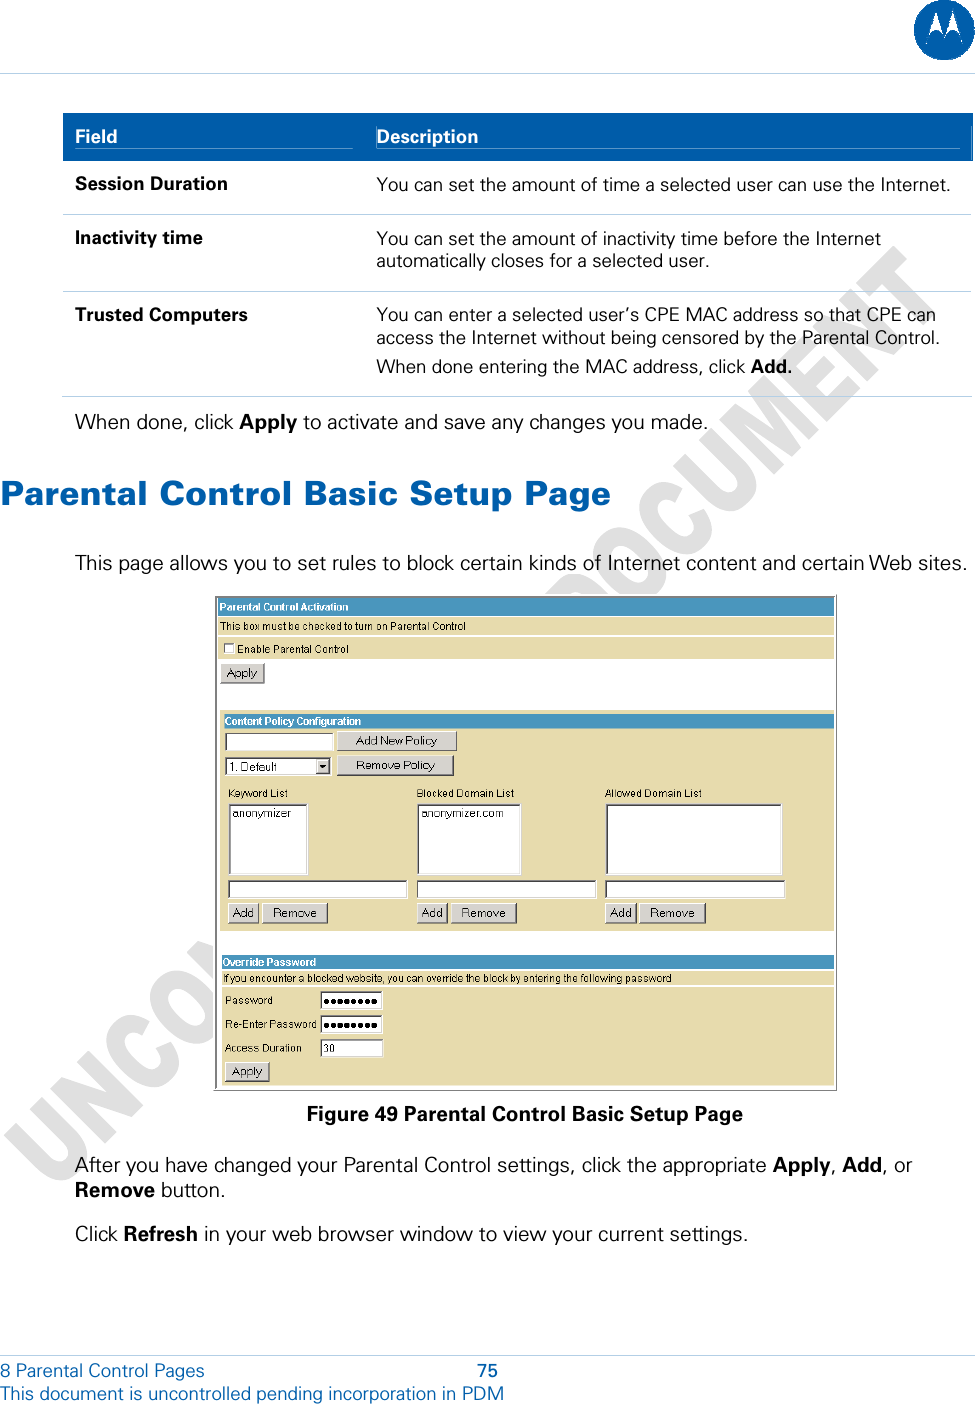  8 Parental Control Pages  75 This document is uncontrolled pending incorporation in PDM  Field   Description Session Duration  You can set the amount of time a selected user can use the Internet. Inactivity time  You can set the amount of inactivity time before the Internet automatically closes for a selected user. Trusted Computers  You can enter a selected user’s CPE MAC address so that CPE can access the Internet without being censored by the Parental Control. When done entering the MAC address, click Add. When done, click Apply to activate and save any changes you made. Parental Control Basic Setup Page This page allows you to set rules to block certain kinds of Internet content and certain Web sites.  Figure 49 Parental Control Basic Setup Page After you have changed your Parental Control settings, click the appropriate Apply, Add, or Remove button. Click Refresh in your web browser window to view your current settings. 